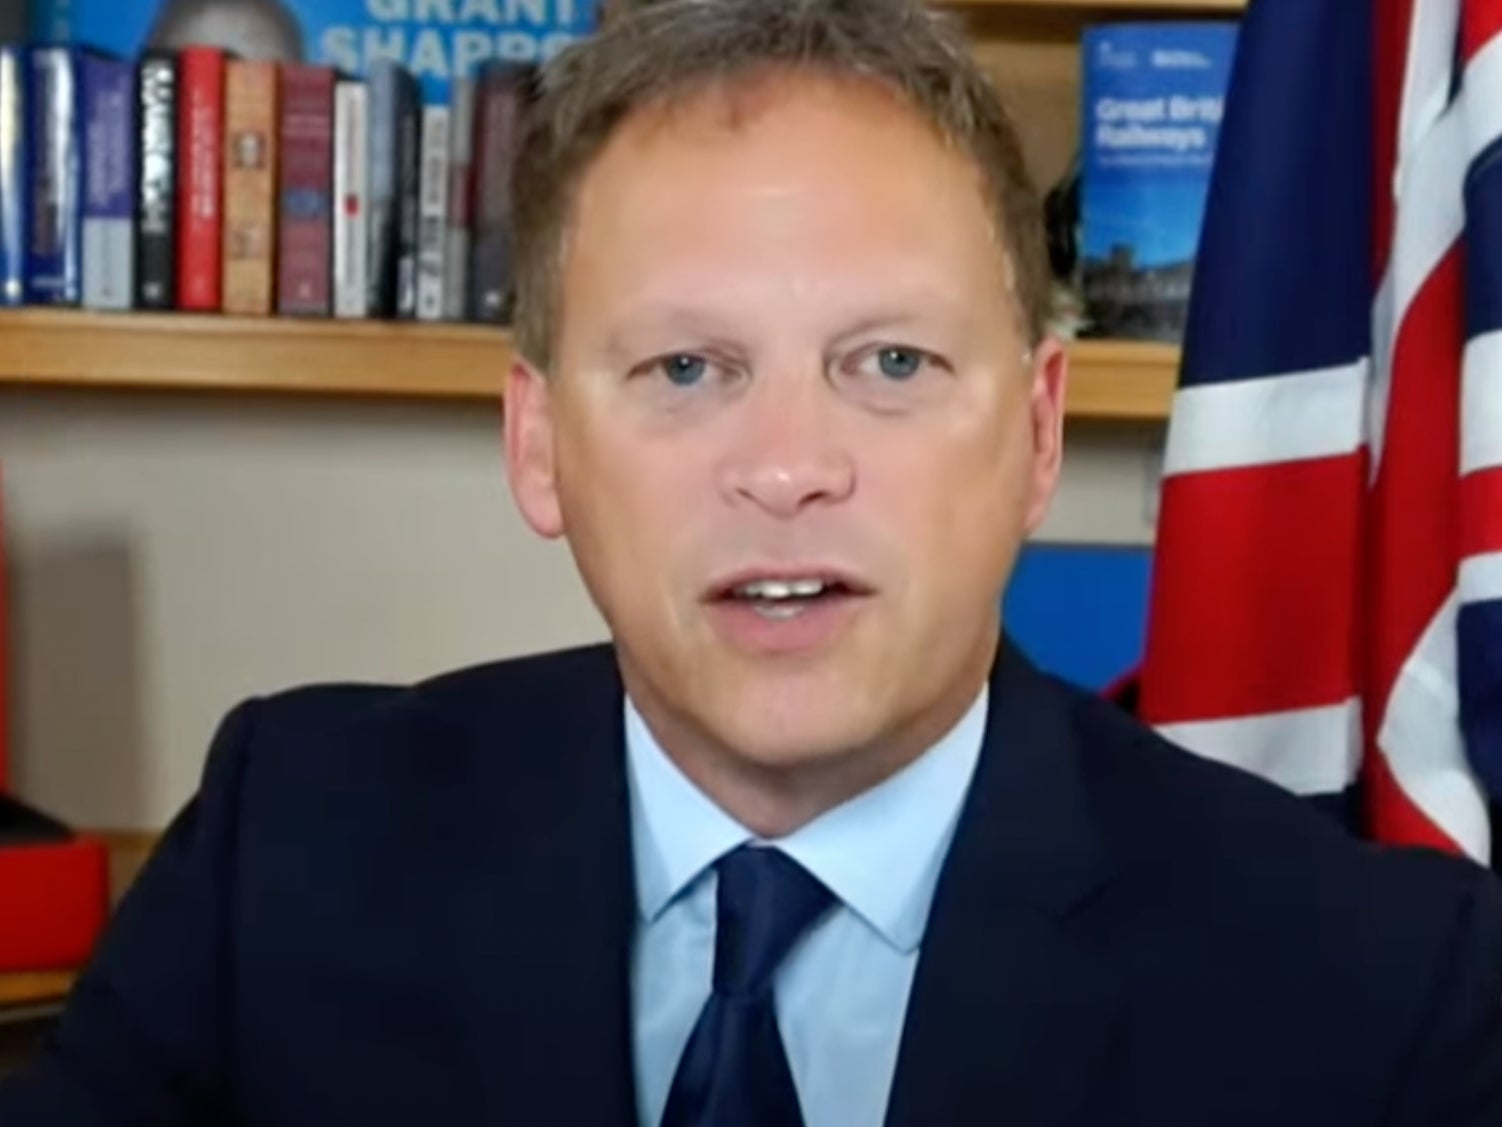 Grant Shapps roasted for claiming Brexit has helped deal with lorry driver shortages instead of causing them